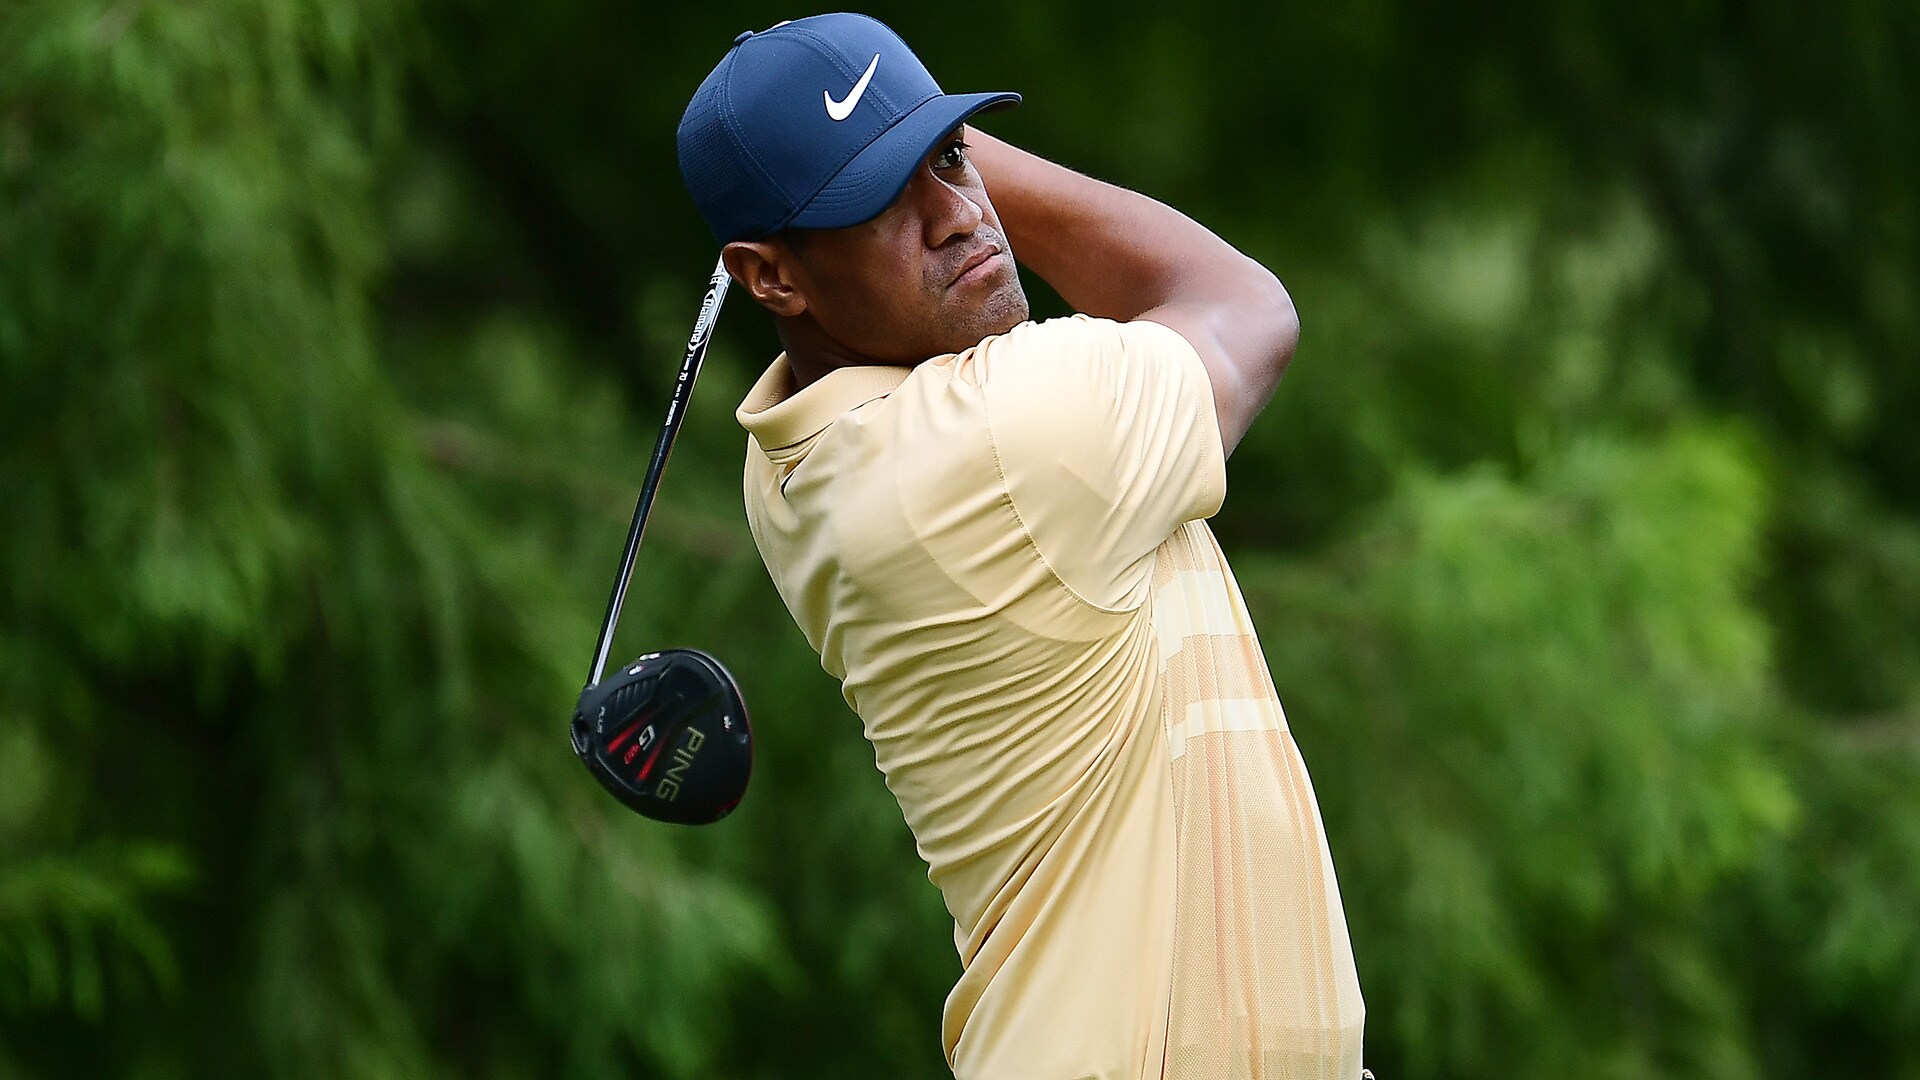 Runner-up finishes not discouraging Tony Finau: ‘That’s the luck of the draw’